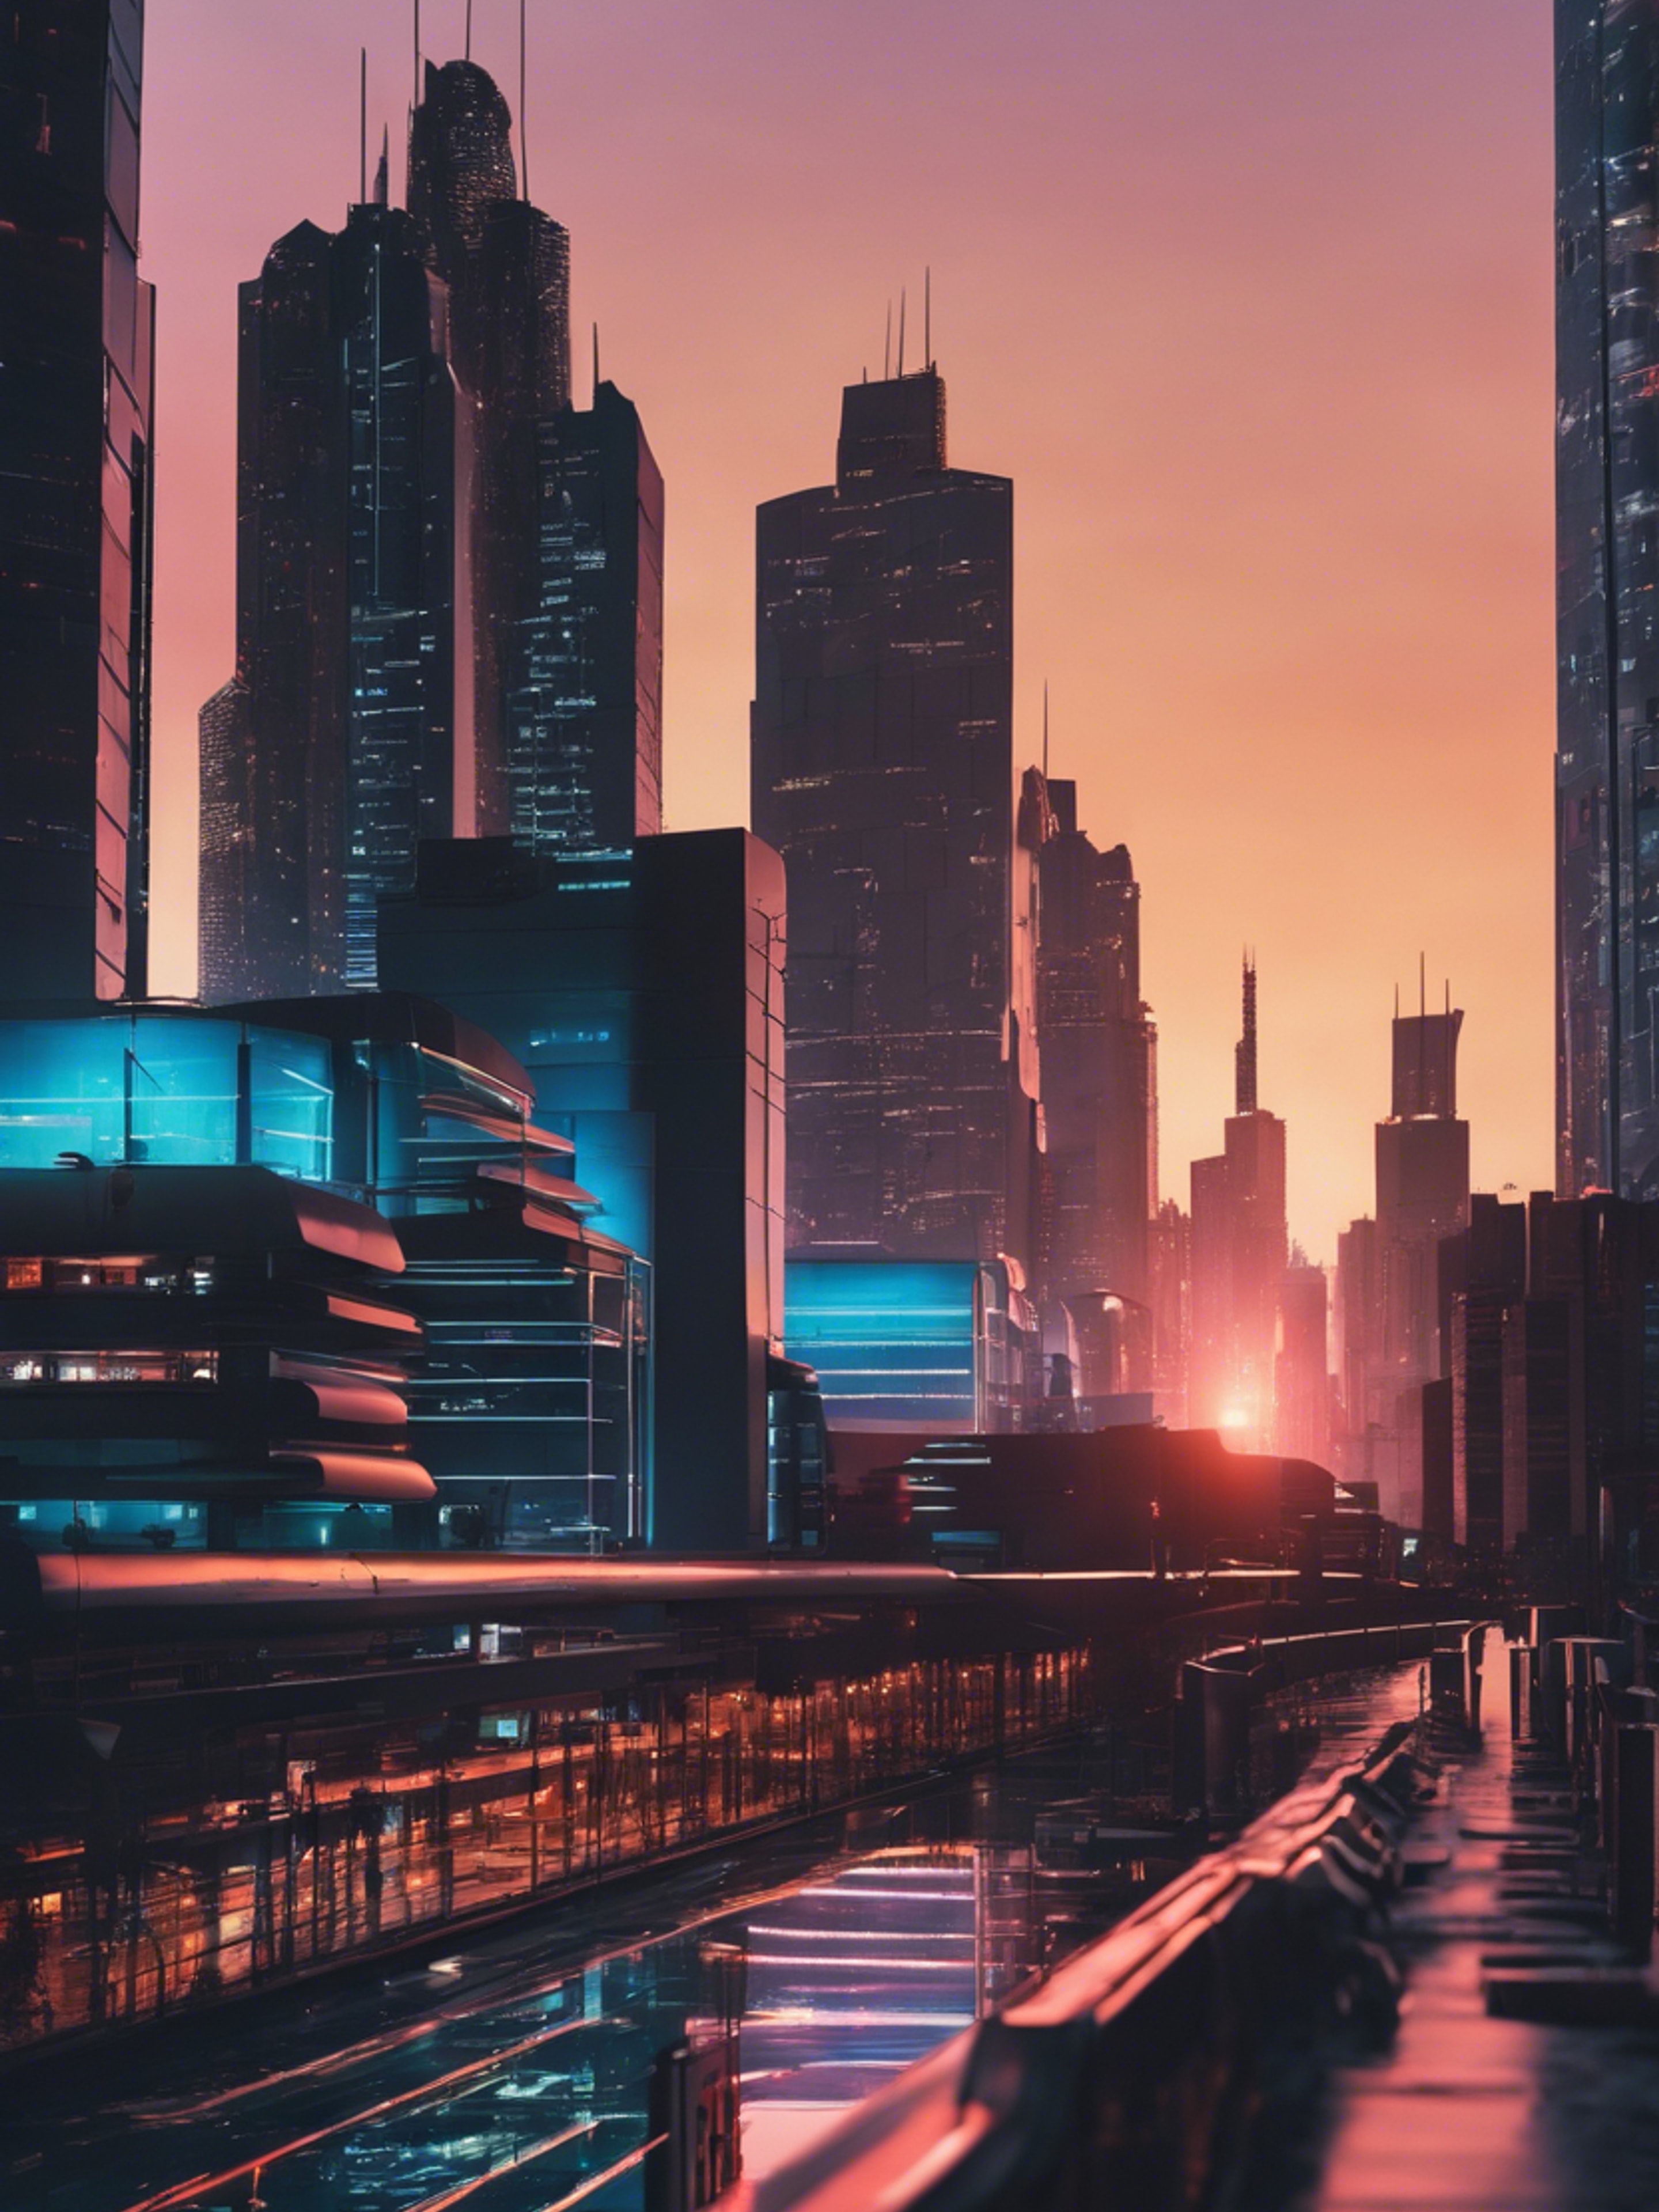 A sleek, futuristic cityscape at sunset, with buildings made of reflective black glass, sparking with cool neon lights. Hintergrund[602b1b36f4744978842c]